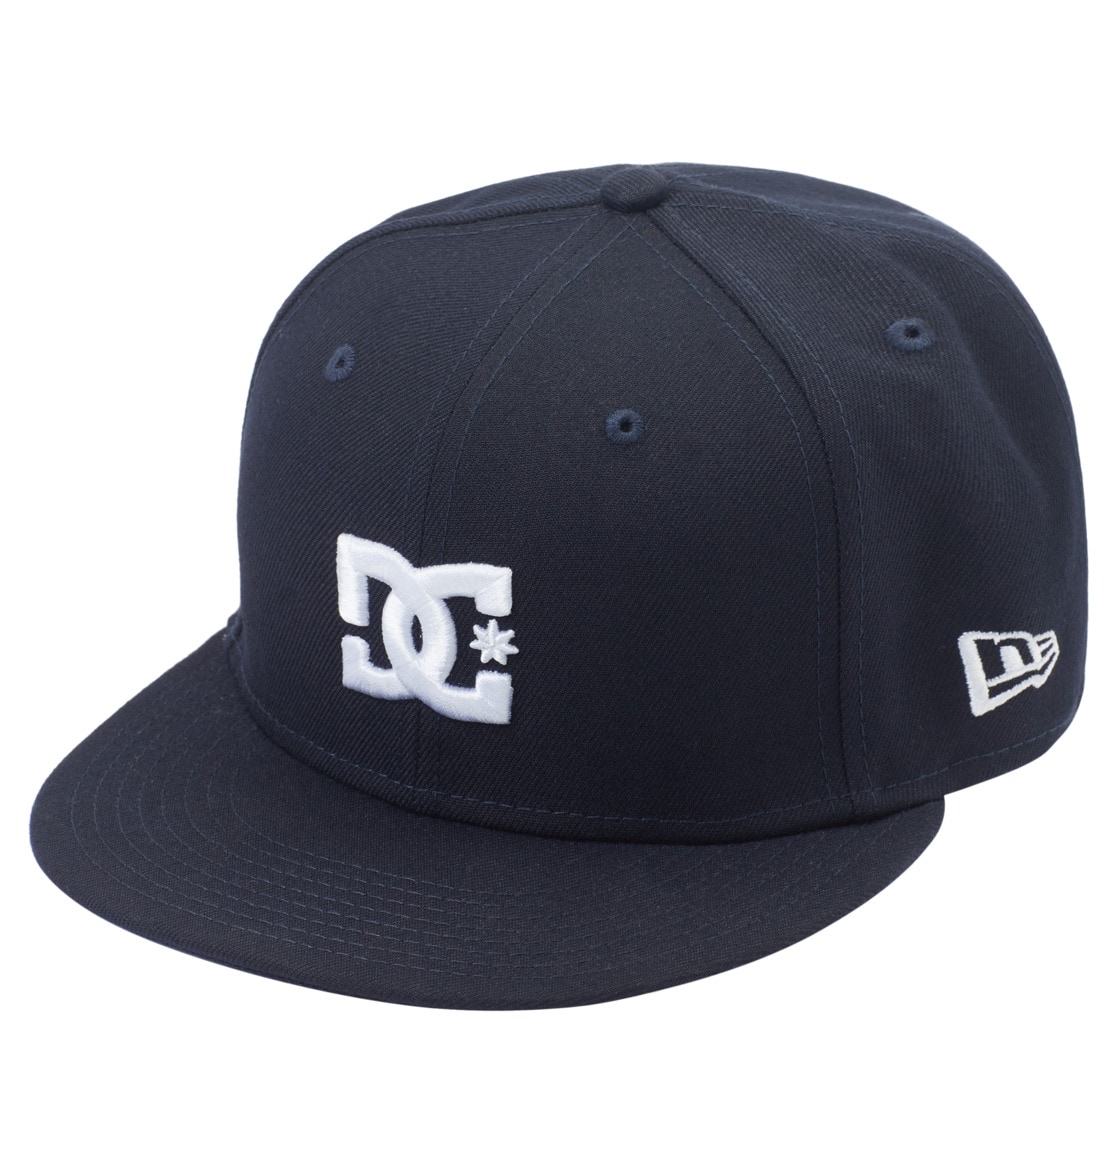 DC Shoes Fitted Cap »Championship« OTTO Shop im Online